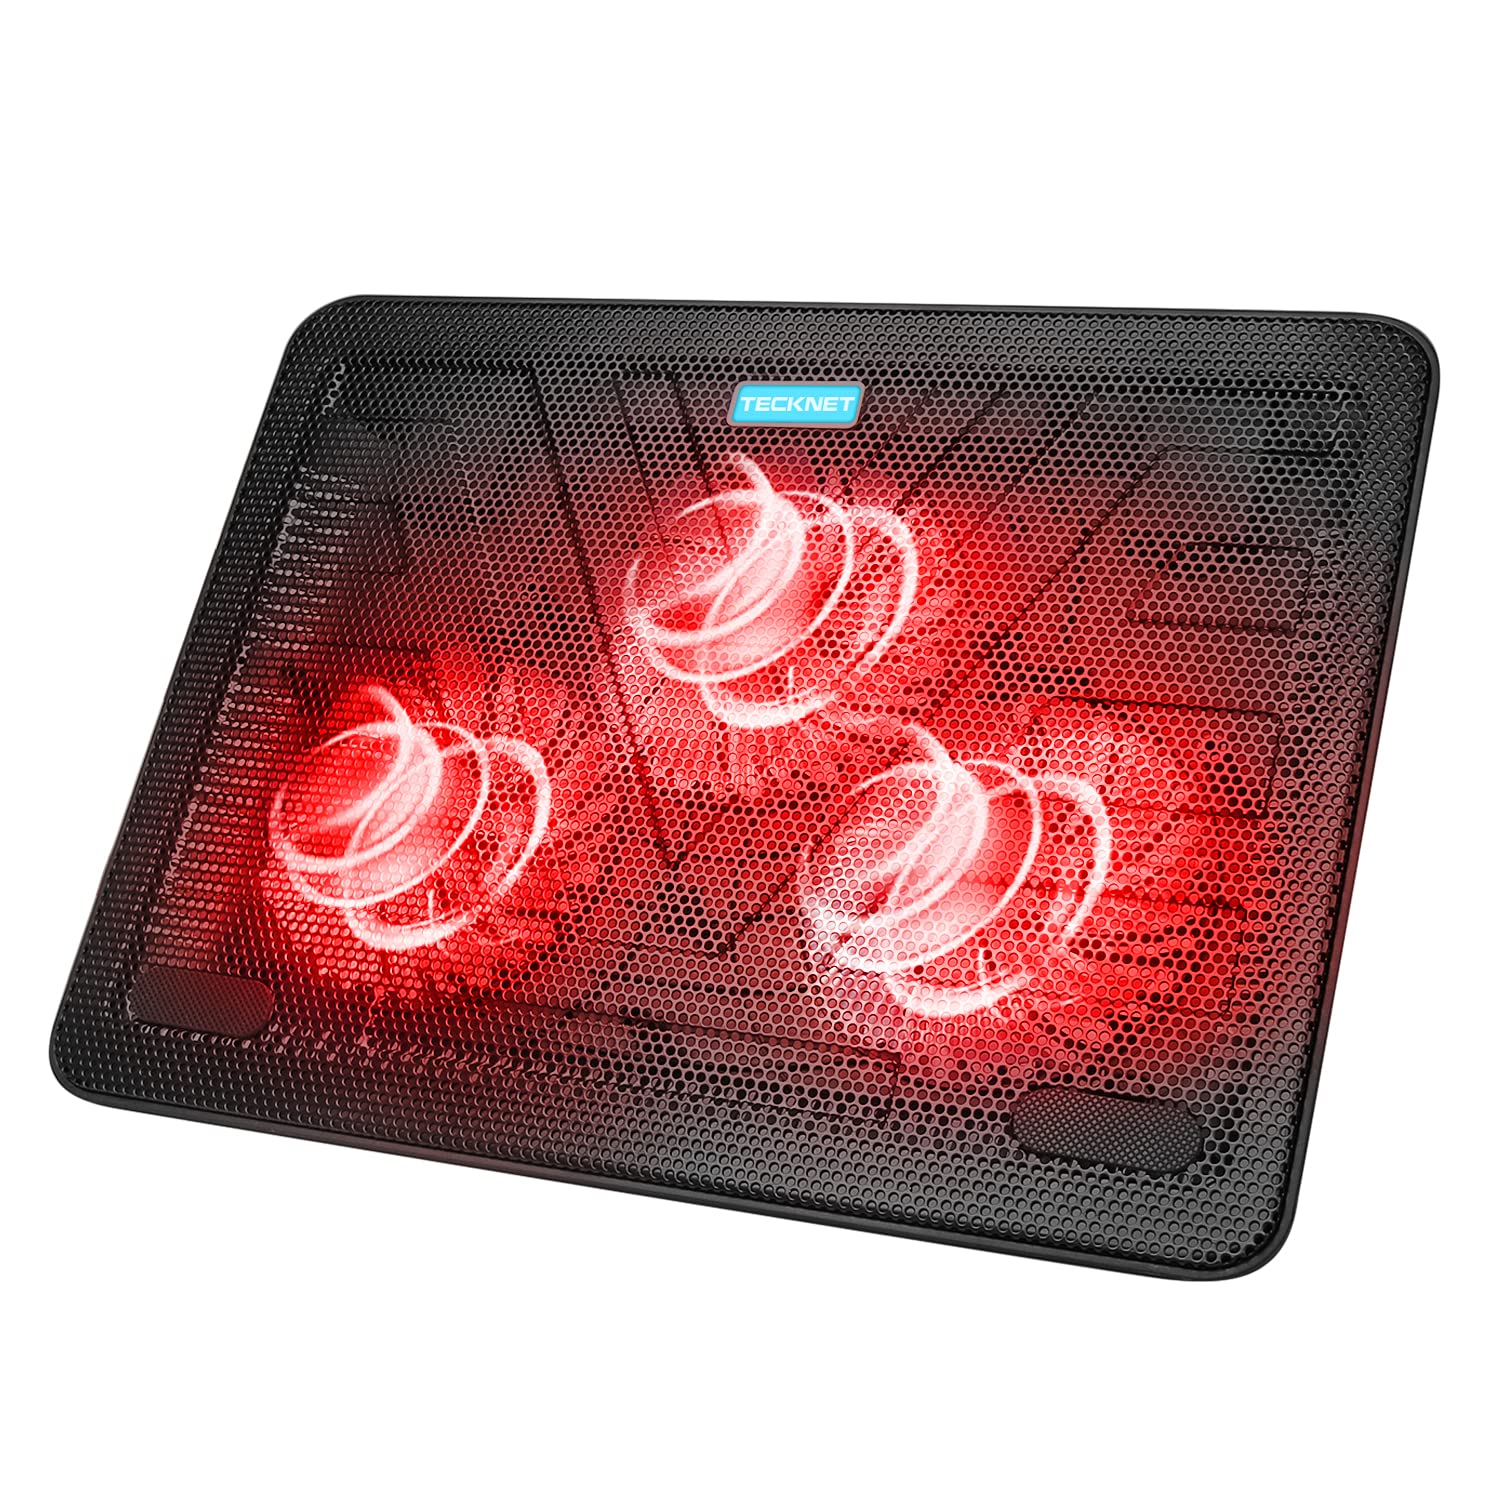 TECKNET Laptop Cooling Pad, Portable Slim Quiet USB Powered Laptop Notebook Cooler Cooling Pad Stand Chill Mat with 3 Red LED Fans, Fits 12-17 Inches